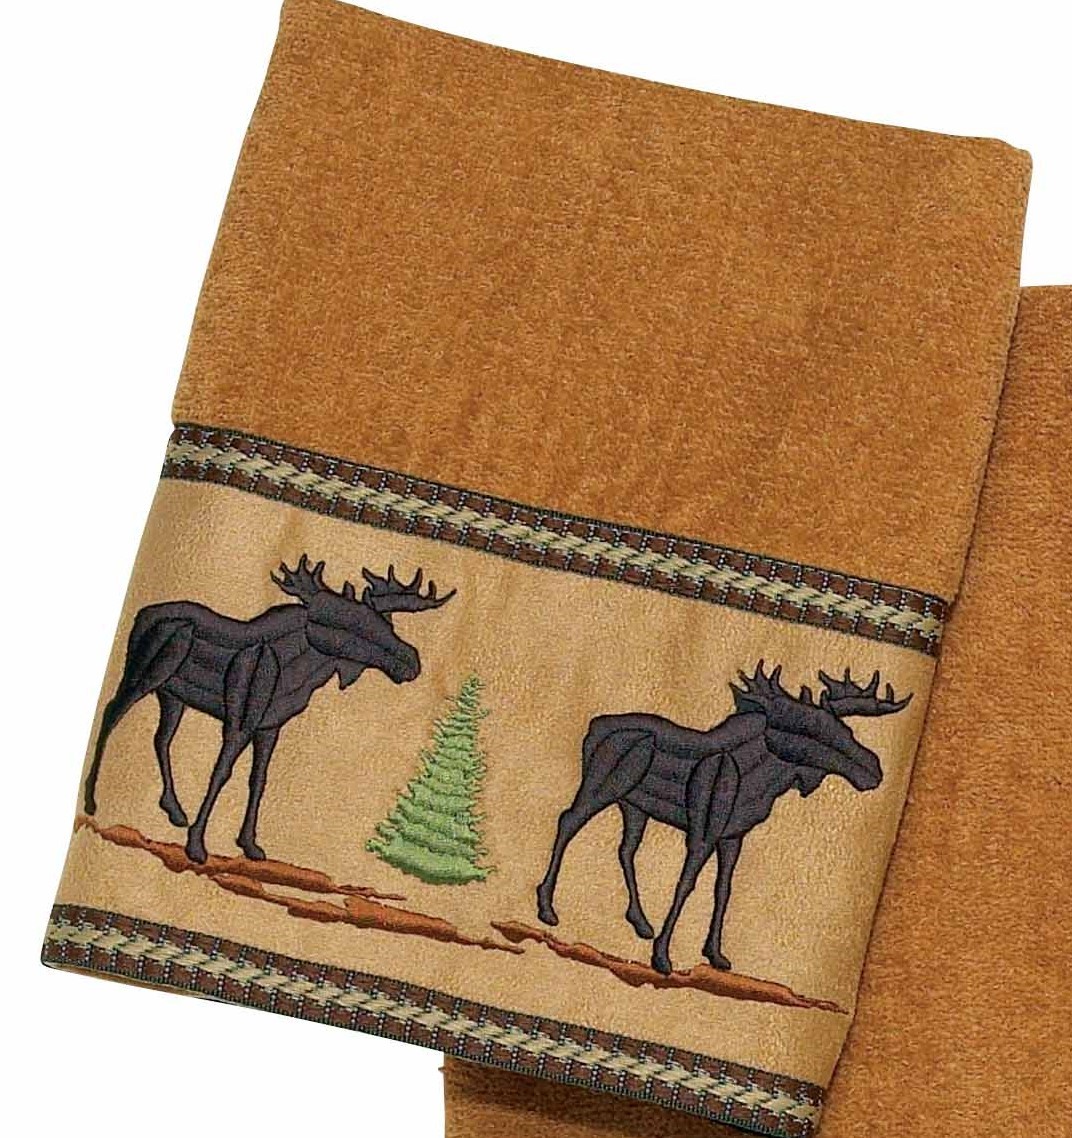 Moose Hand Towel New with tags Bathroom Rustic Log Cabin Forrest Decor Soft 